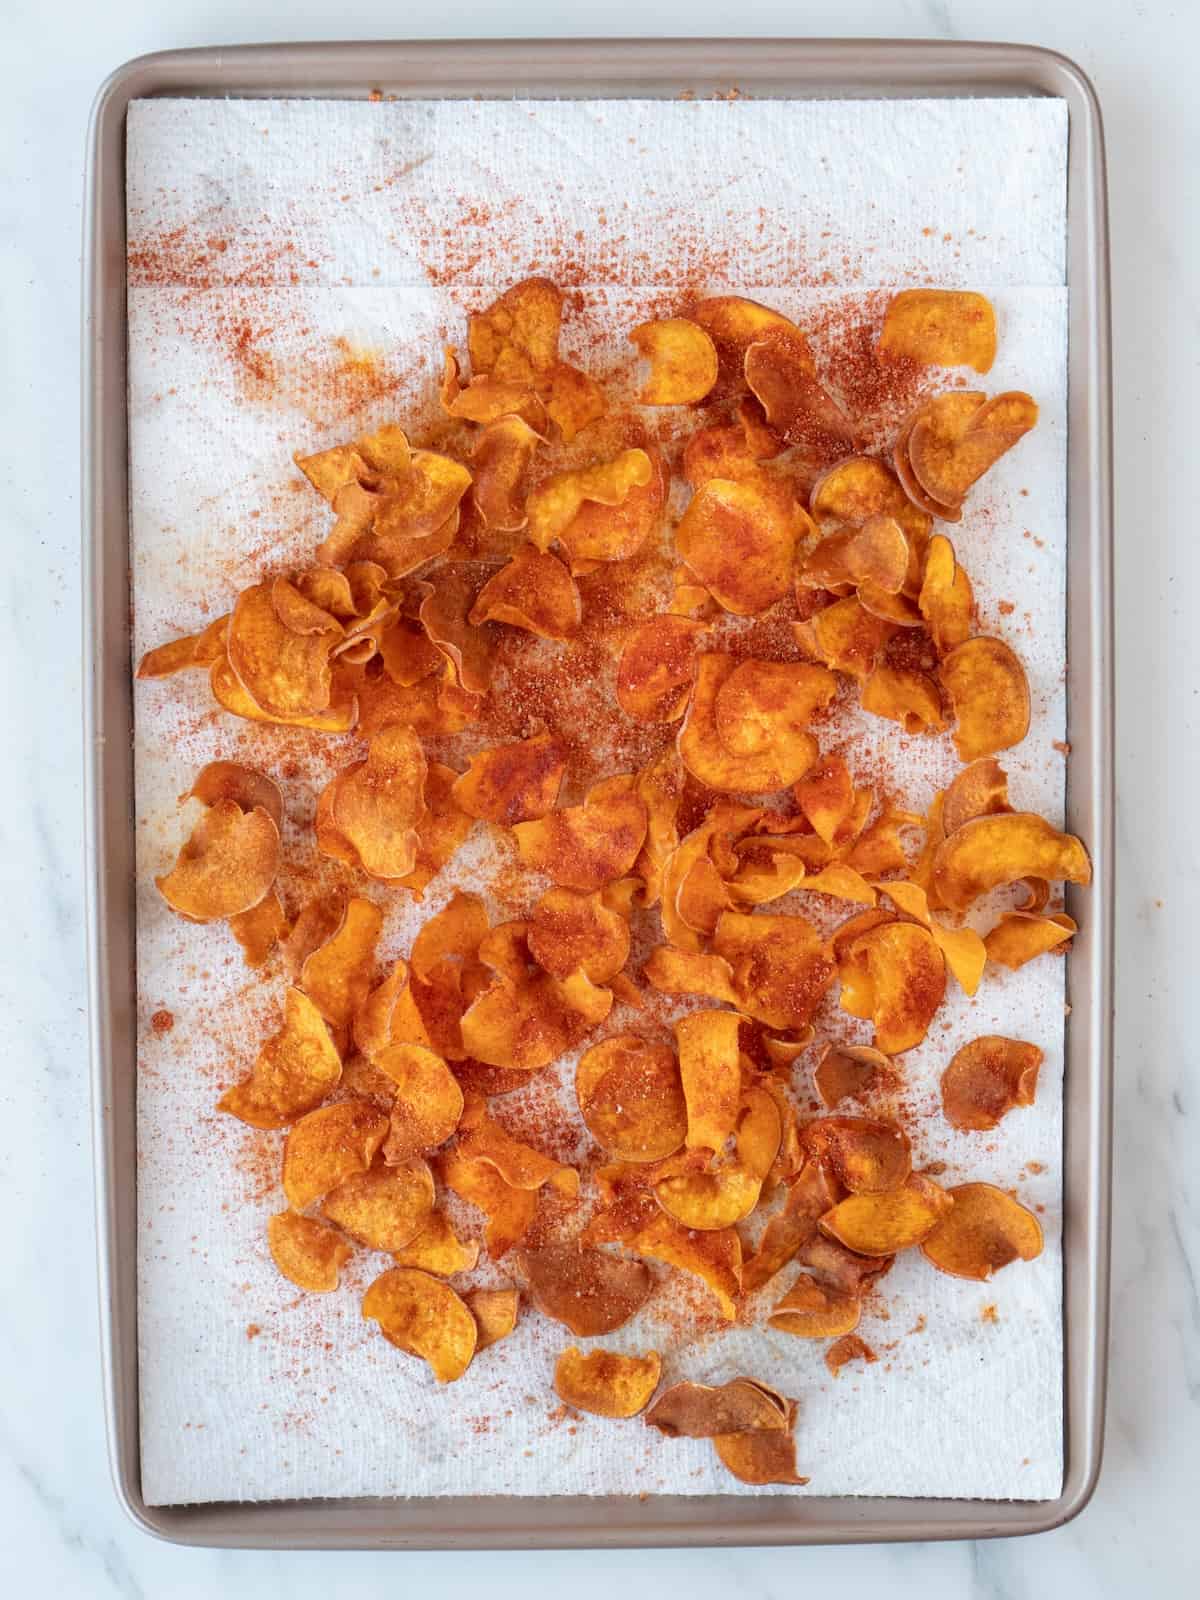 A paper tissue lined baking sheet with sweet potato chips dusted with BBQ spice mix.